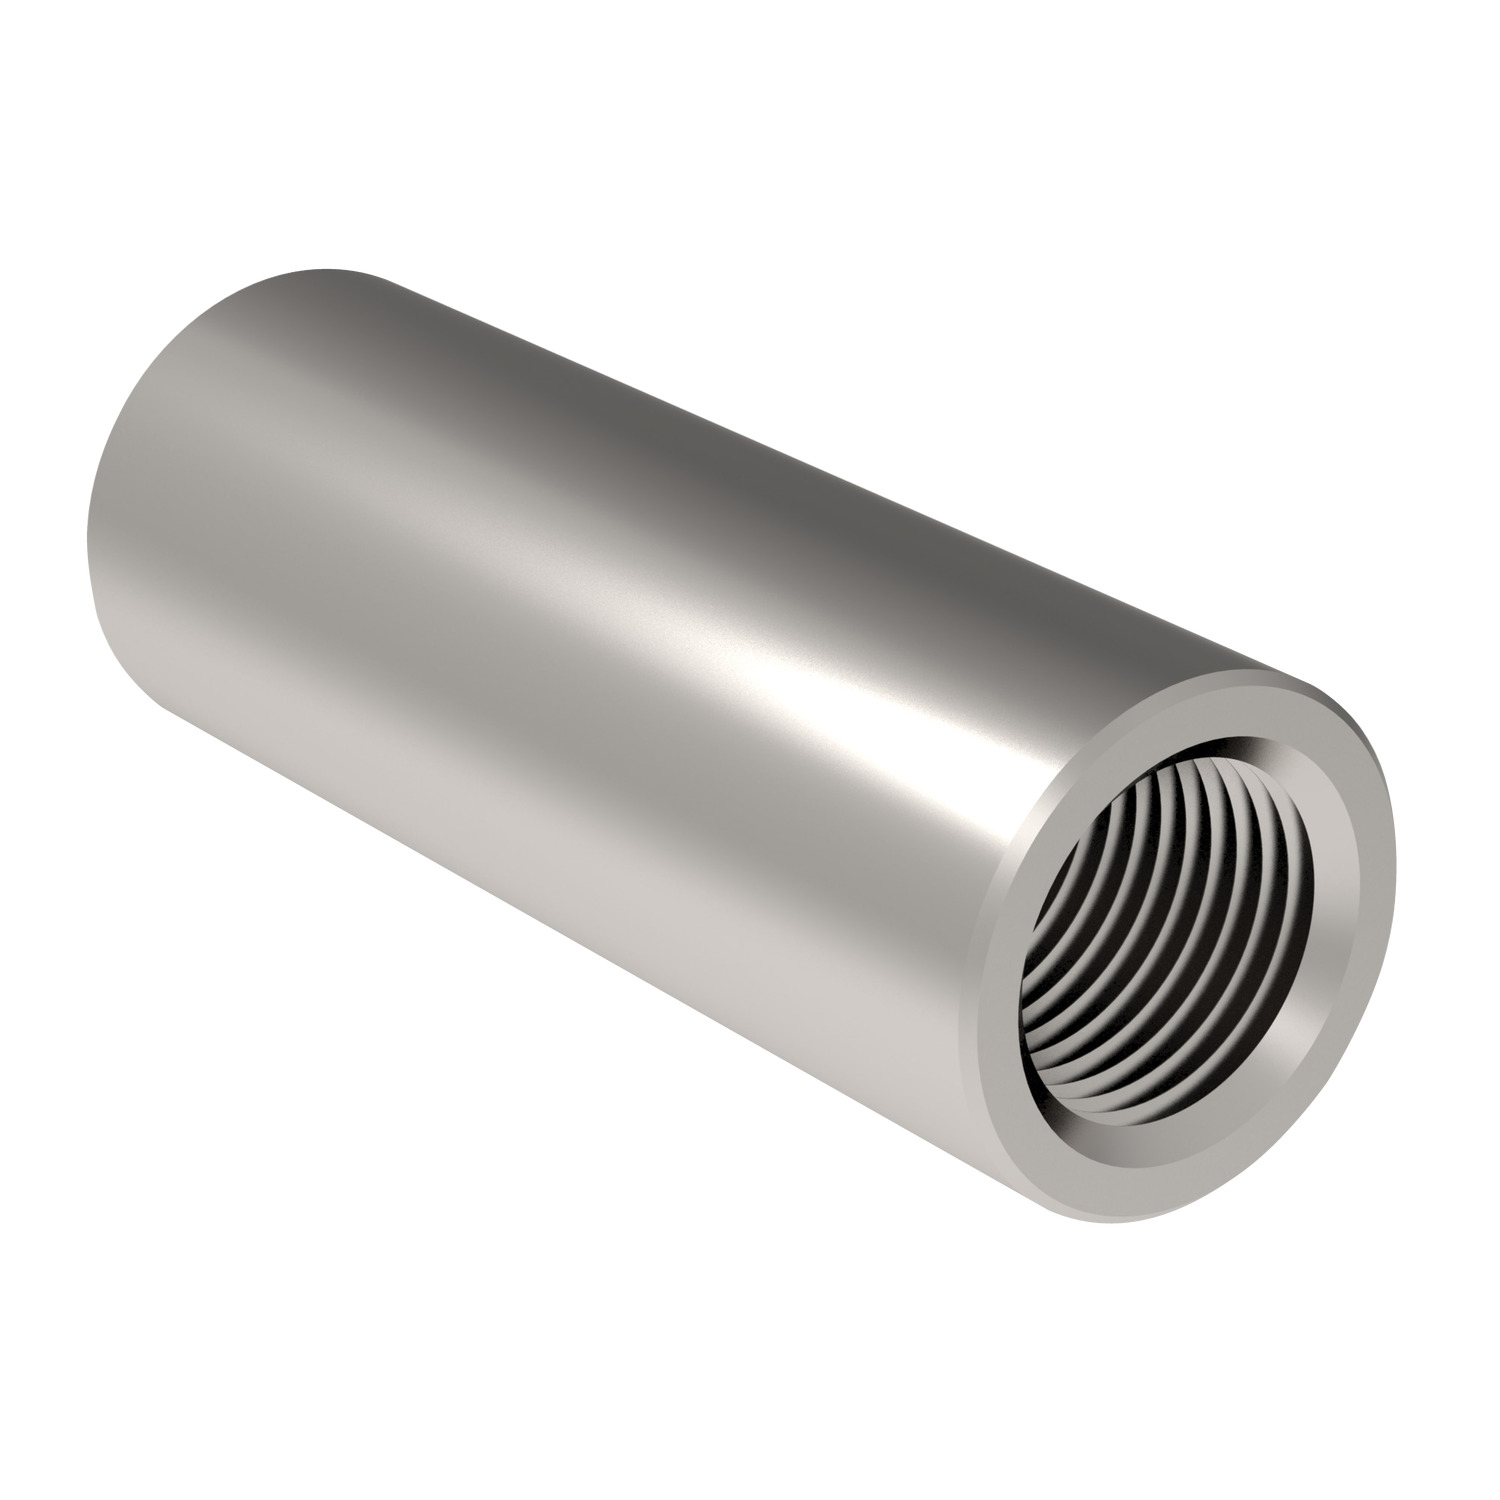 Product P0322.R, Round Coupler Nuts A2 & A4 stainless / 